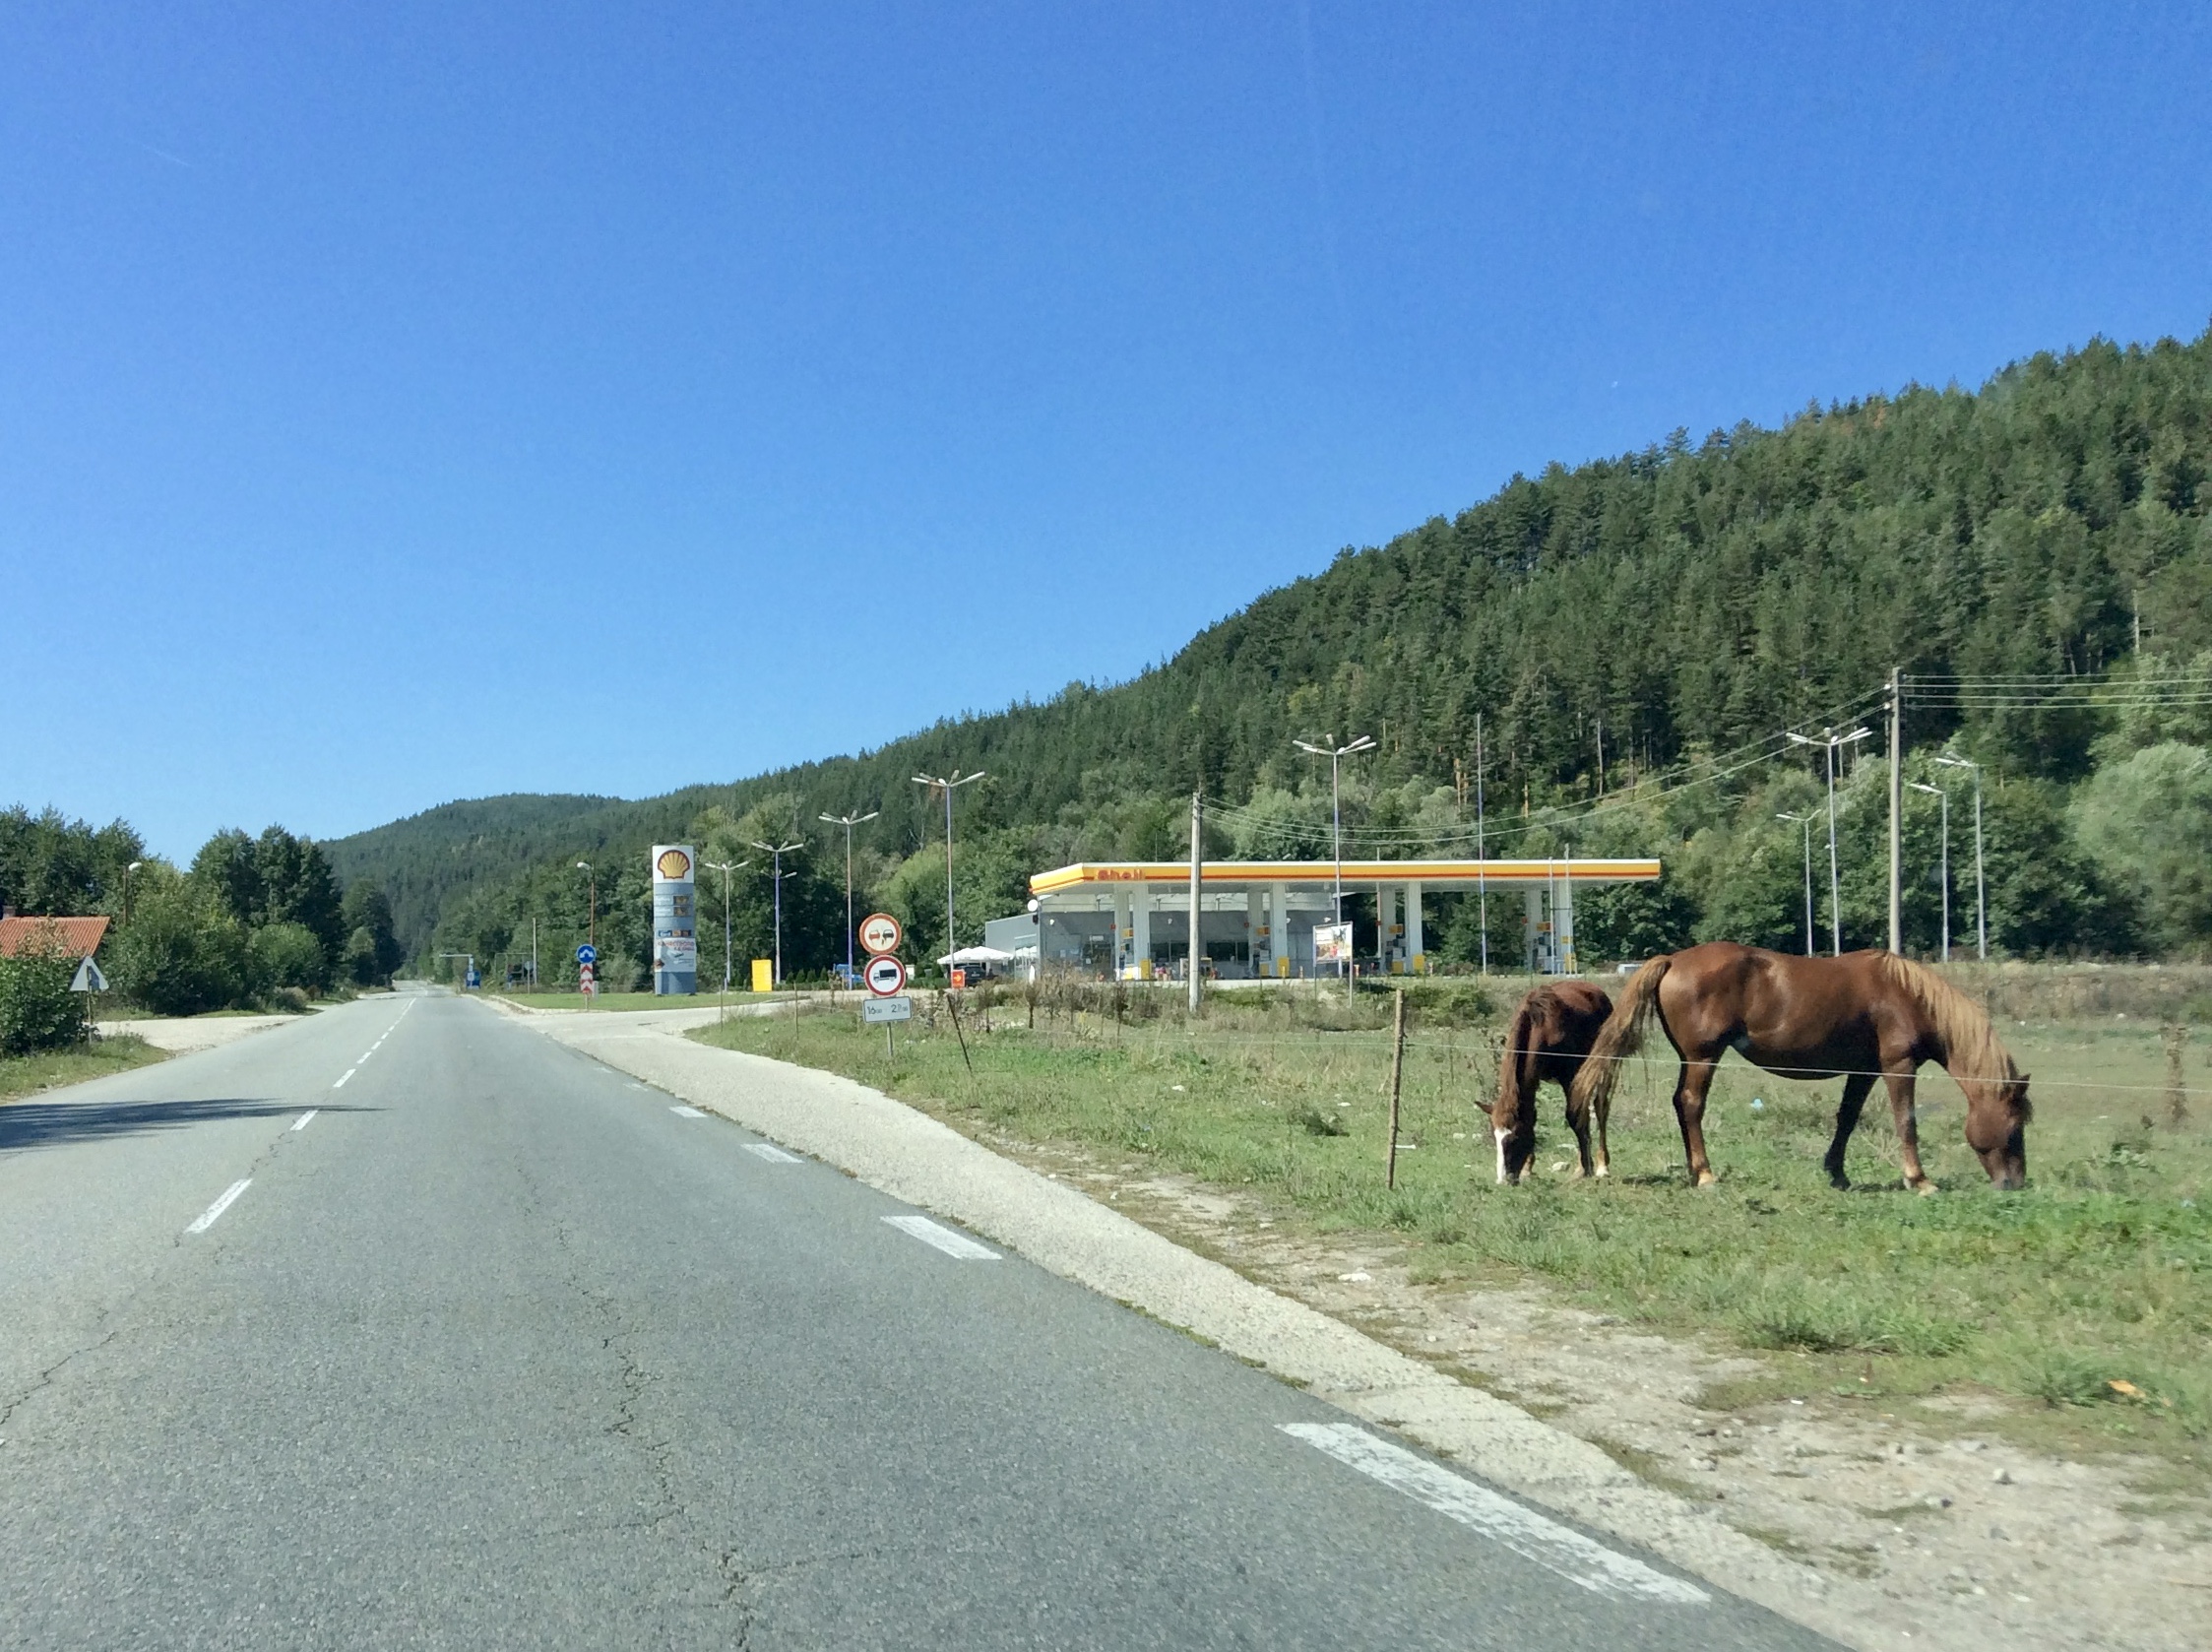 Horses Next to the Road